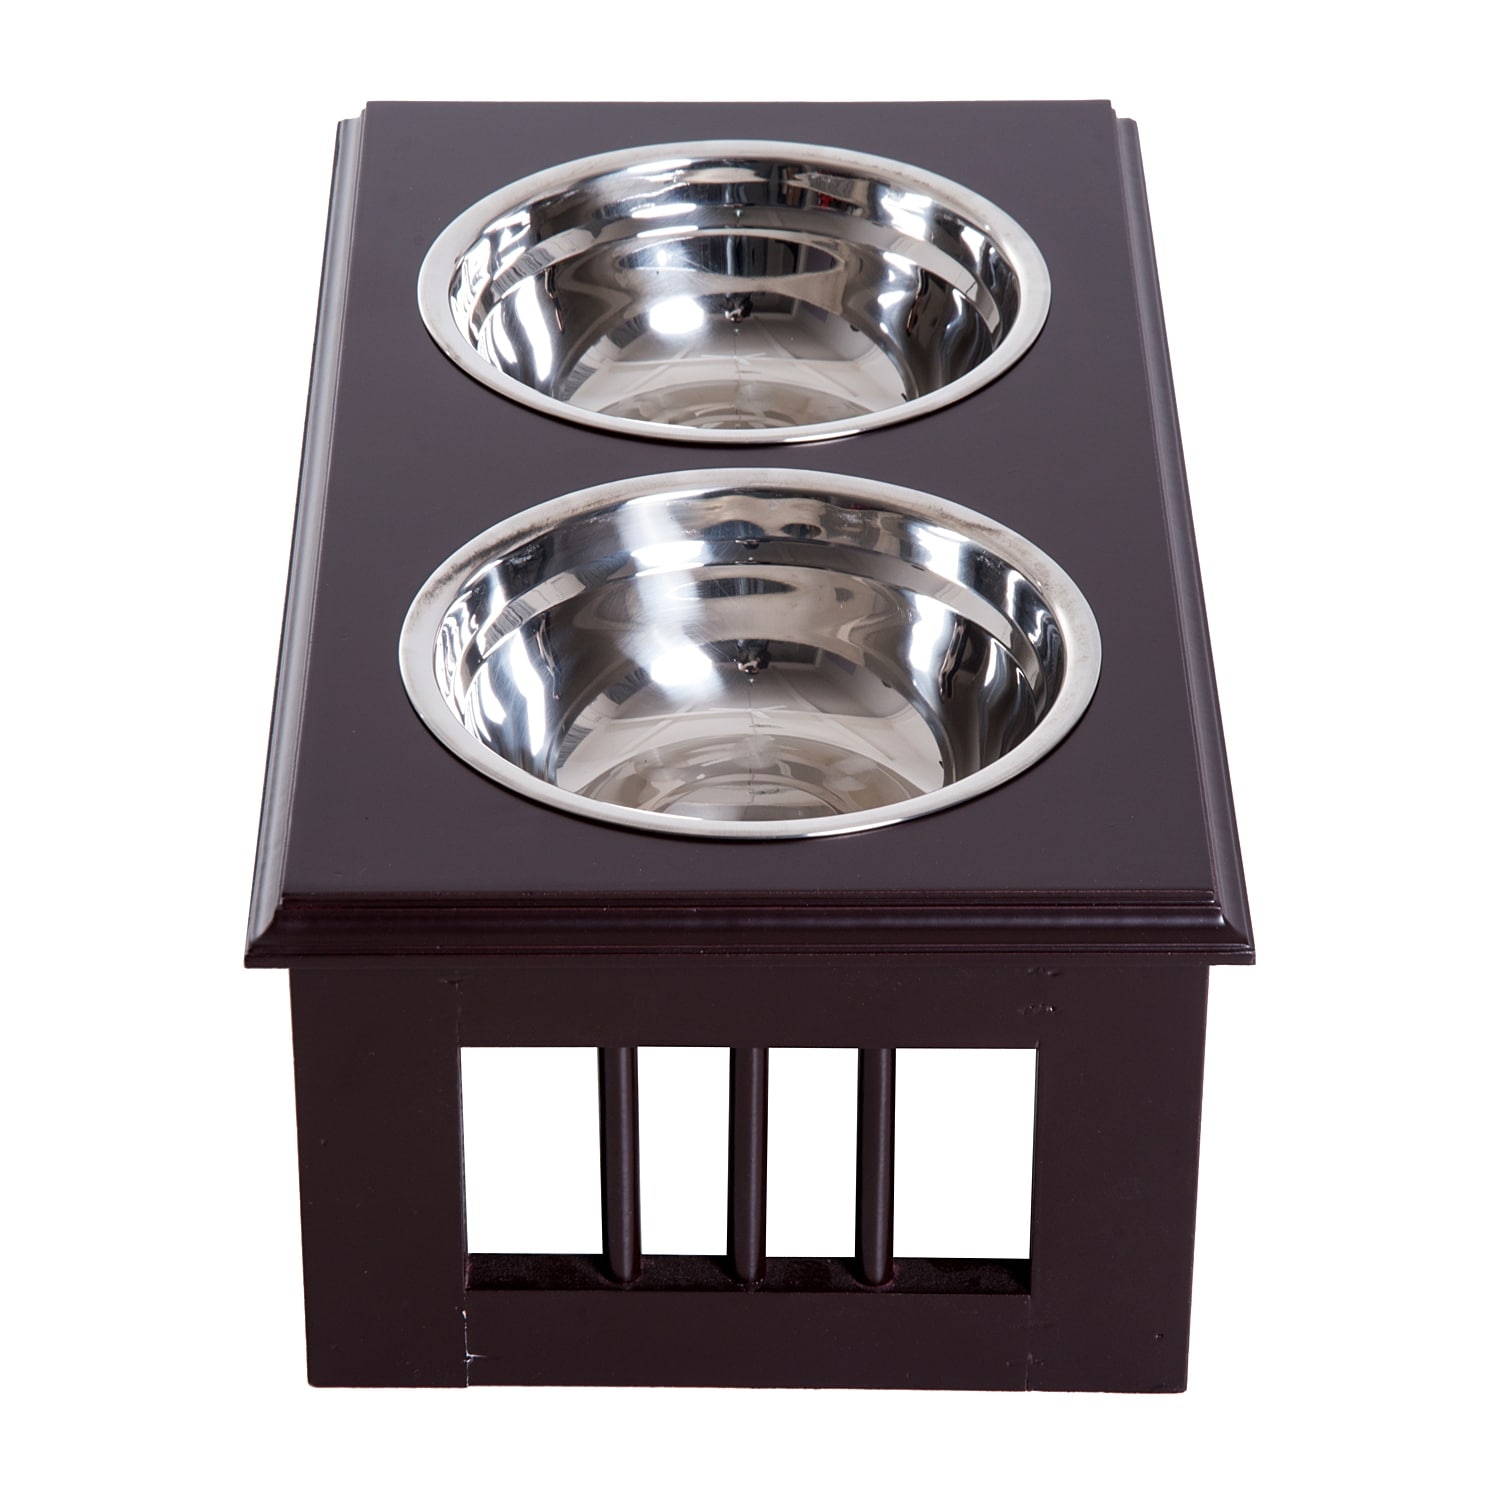 https://ak1.ostkcdn.com/images/products/is/images/direct/17387fda73f4f64f1c9bd323c9c5a12ce3b1897b/PawHut-17%22-Dog-Feeding-Station-with-2-Food-Bowls%2C-White.jpg